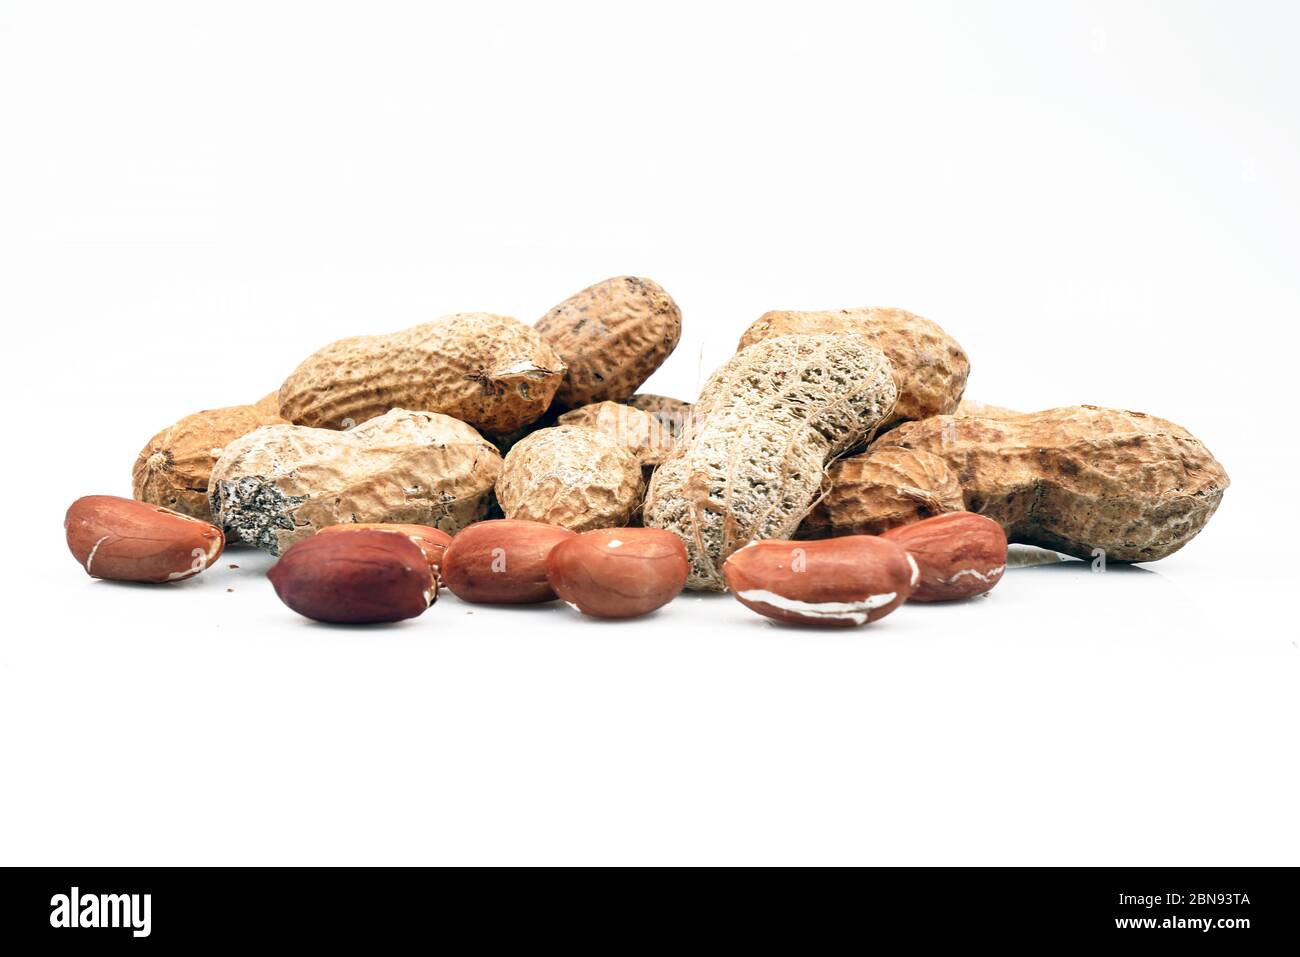 Organic and fresh Shelled and unshelled peanuts. Stock Photo